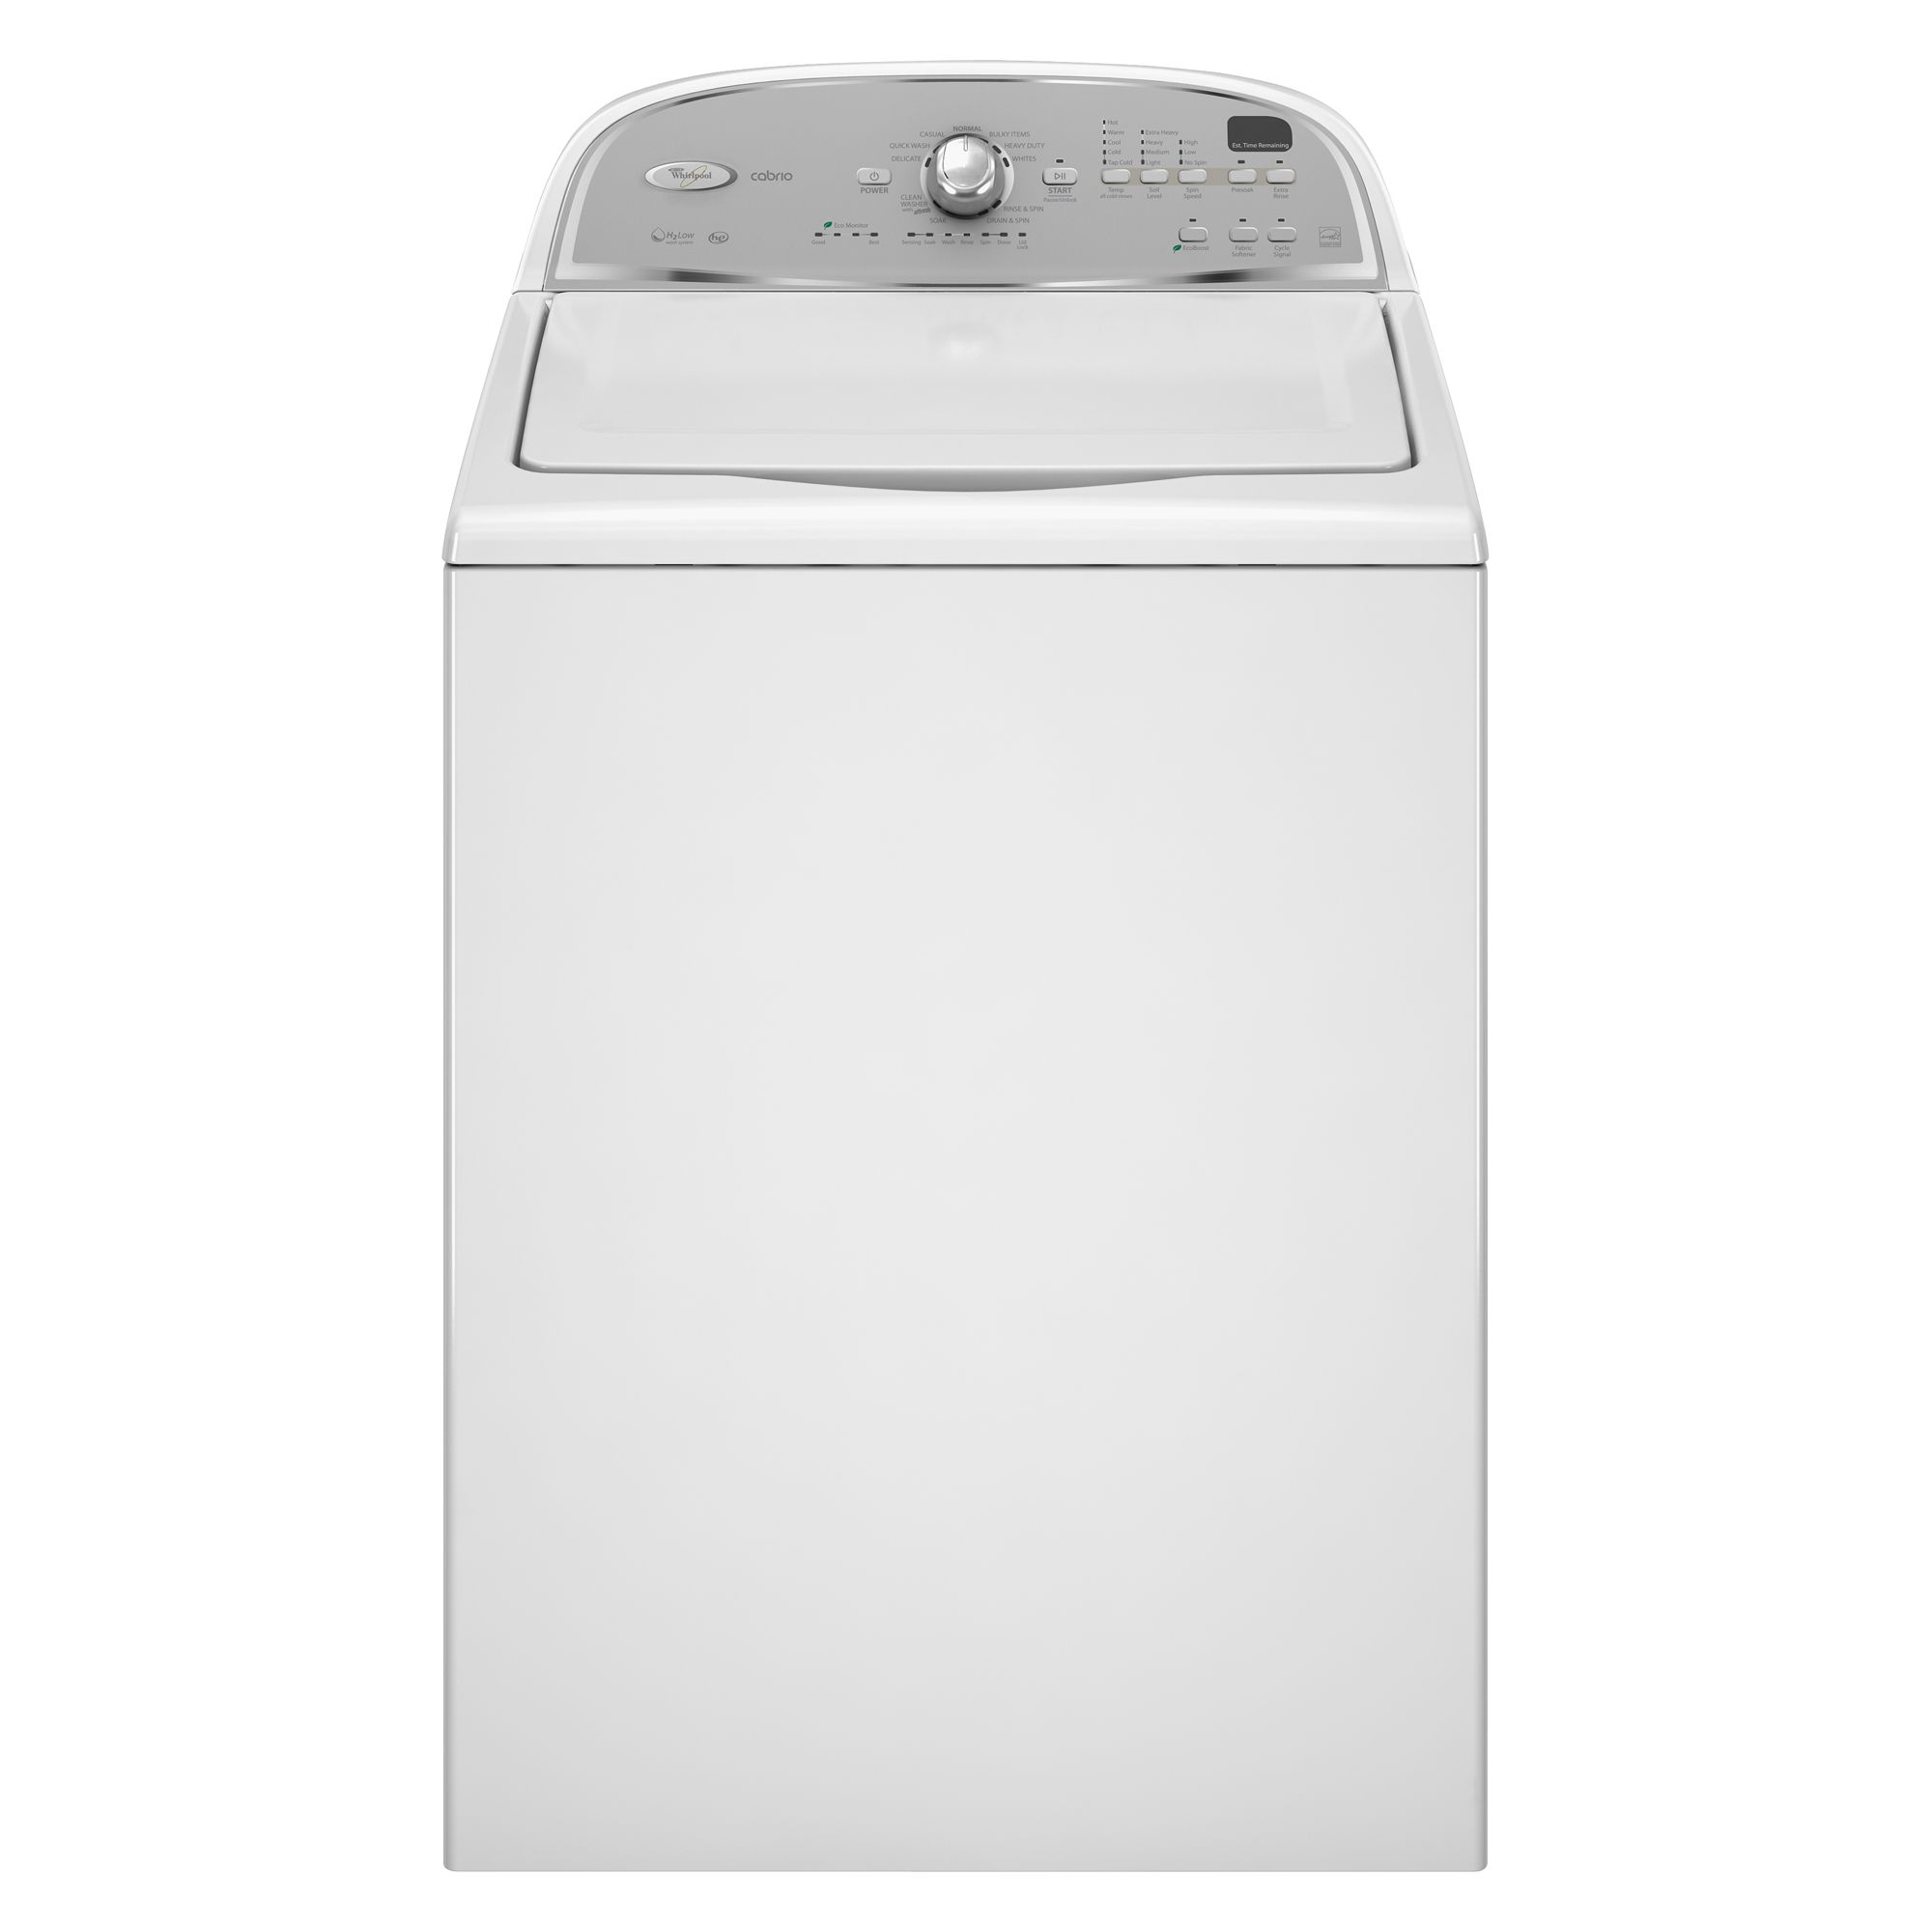 Whirlpool 3.6 cu. ft. Cabrio High-Efficiency Top-Load Washer